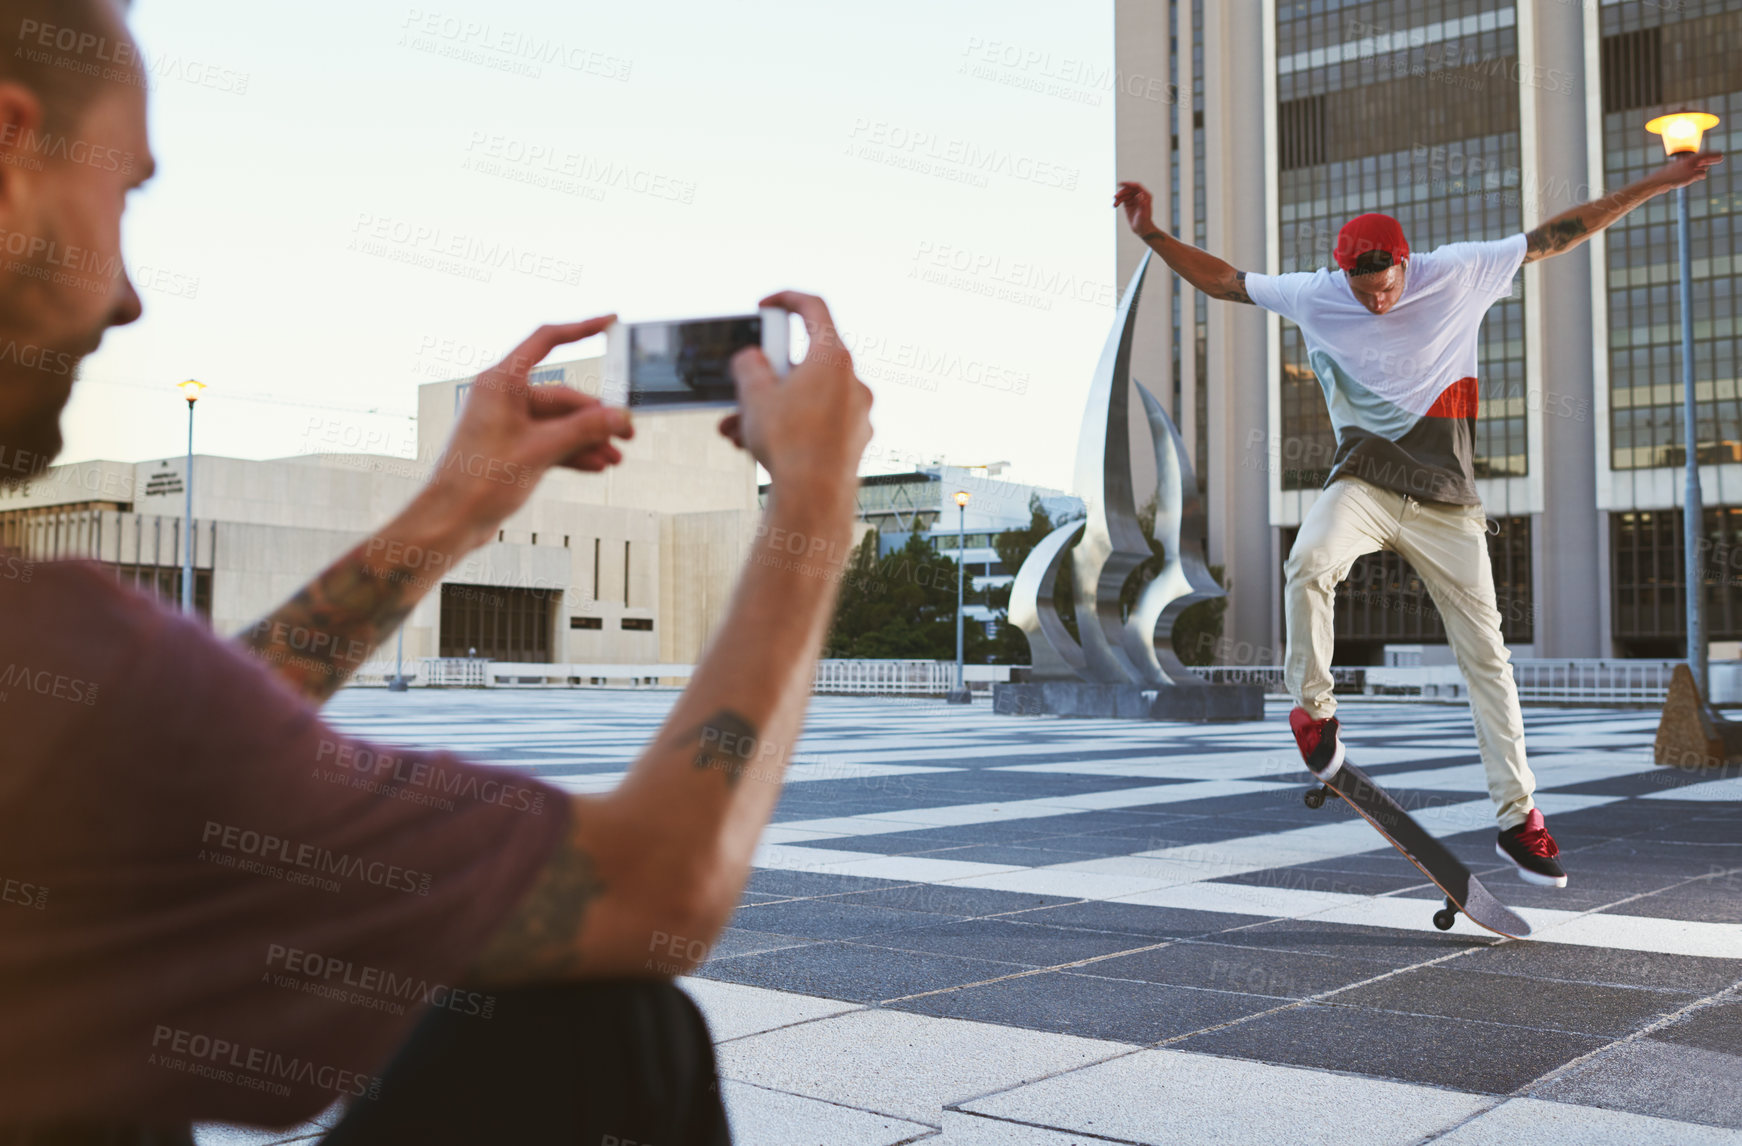 Buy stock photo Shot of a man taking a picture of his friend doing tricks on his skateboard